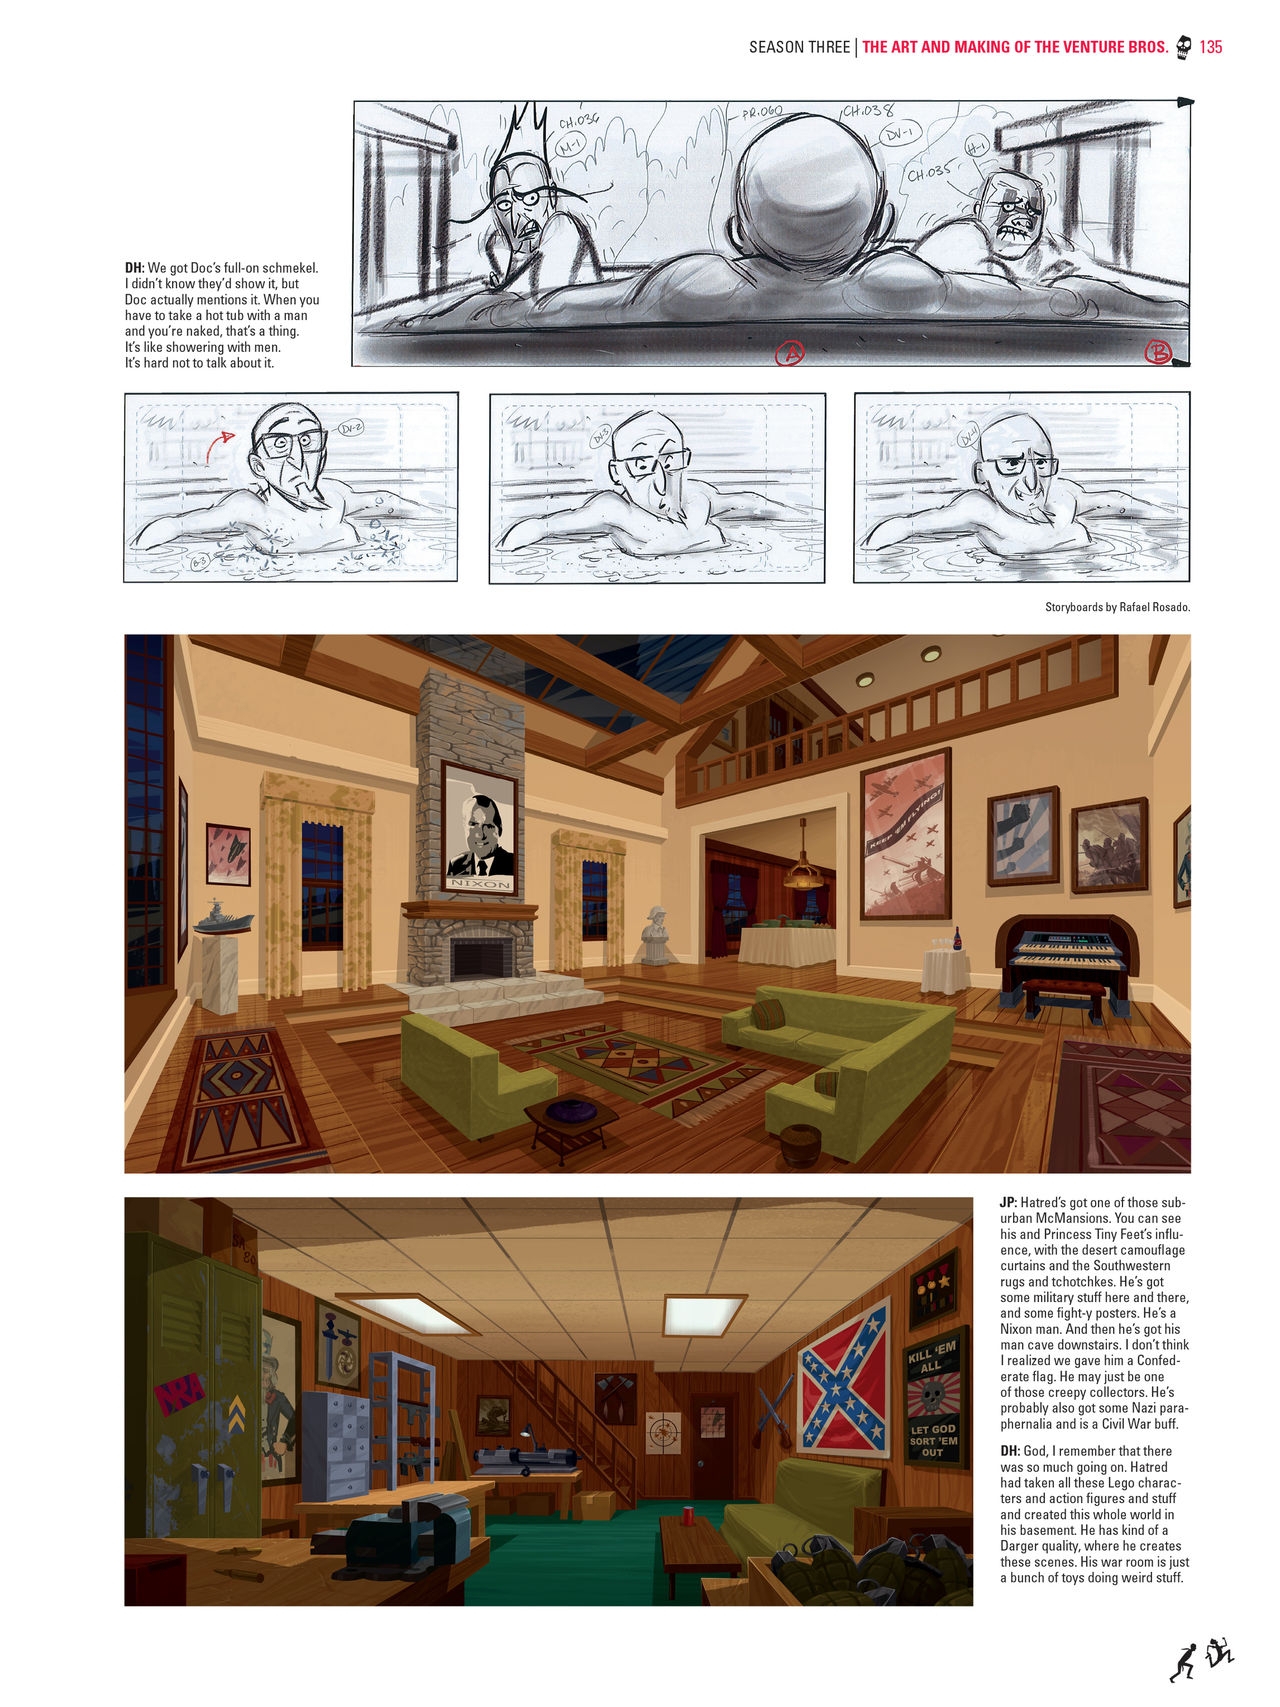 Go Team Venture! - The Art and Making of the Venture Bros 133